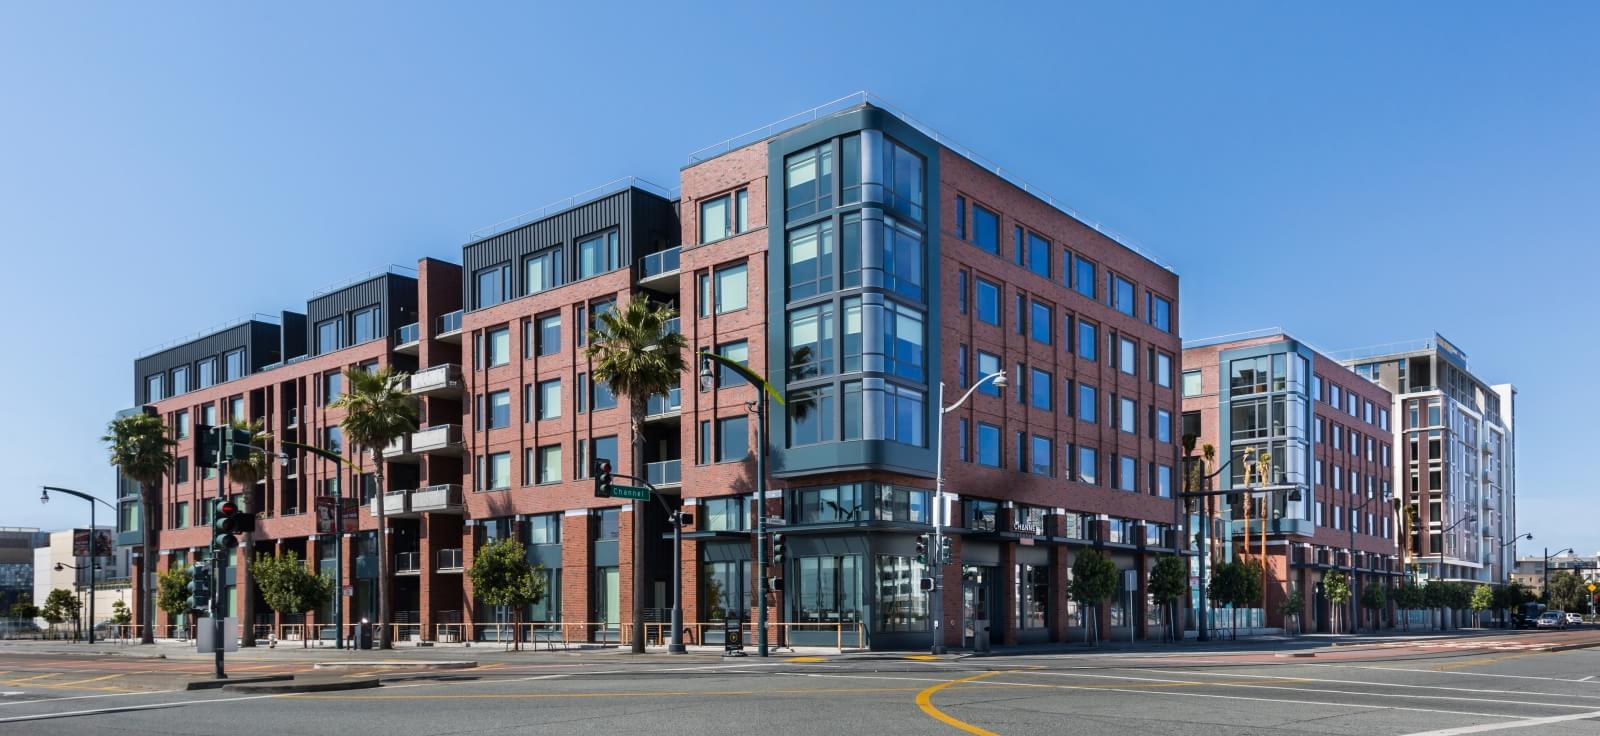 40 New Developments Now Under Construction in San Francisco – 33/40